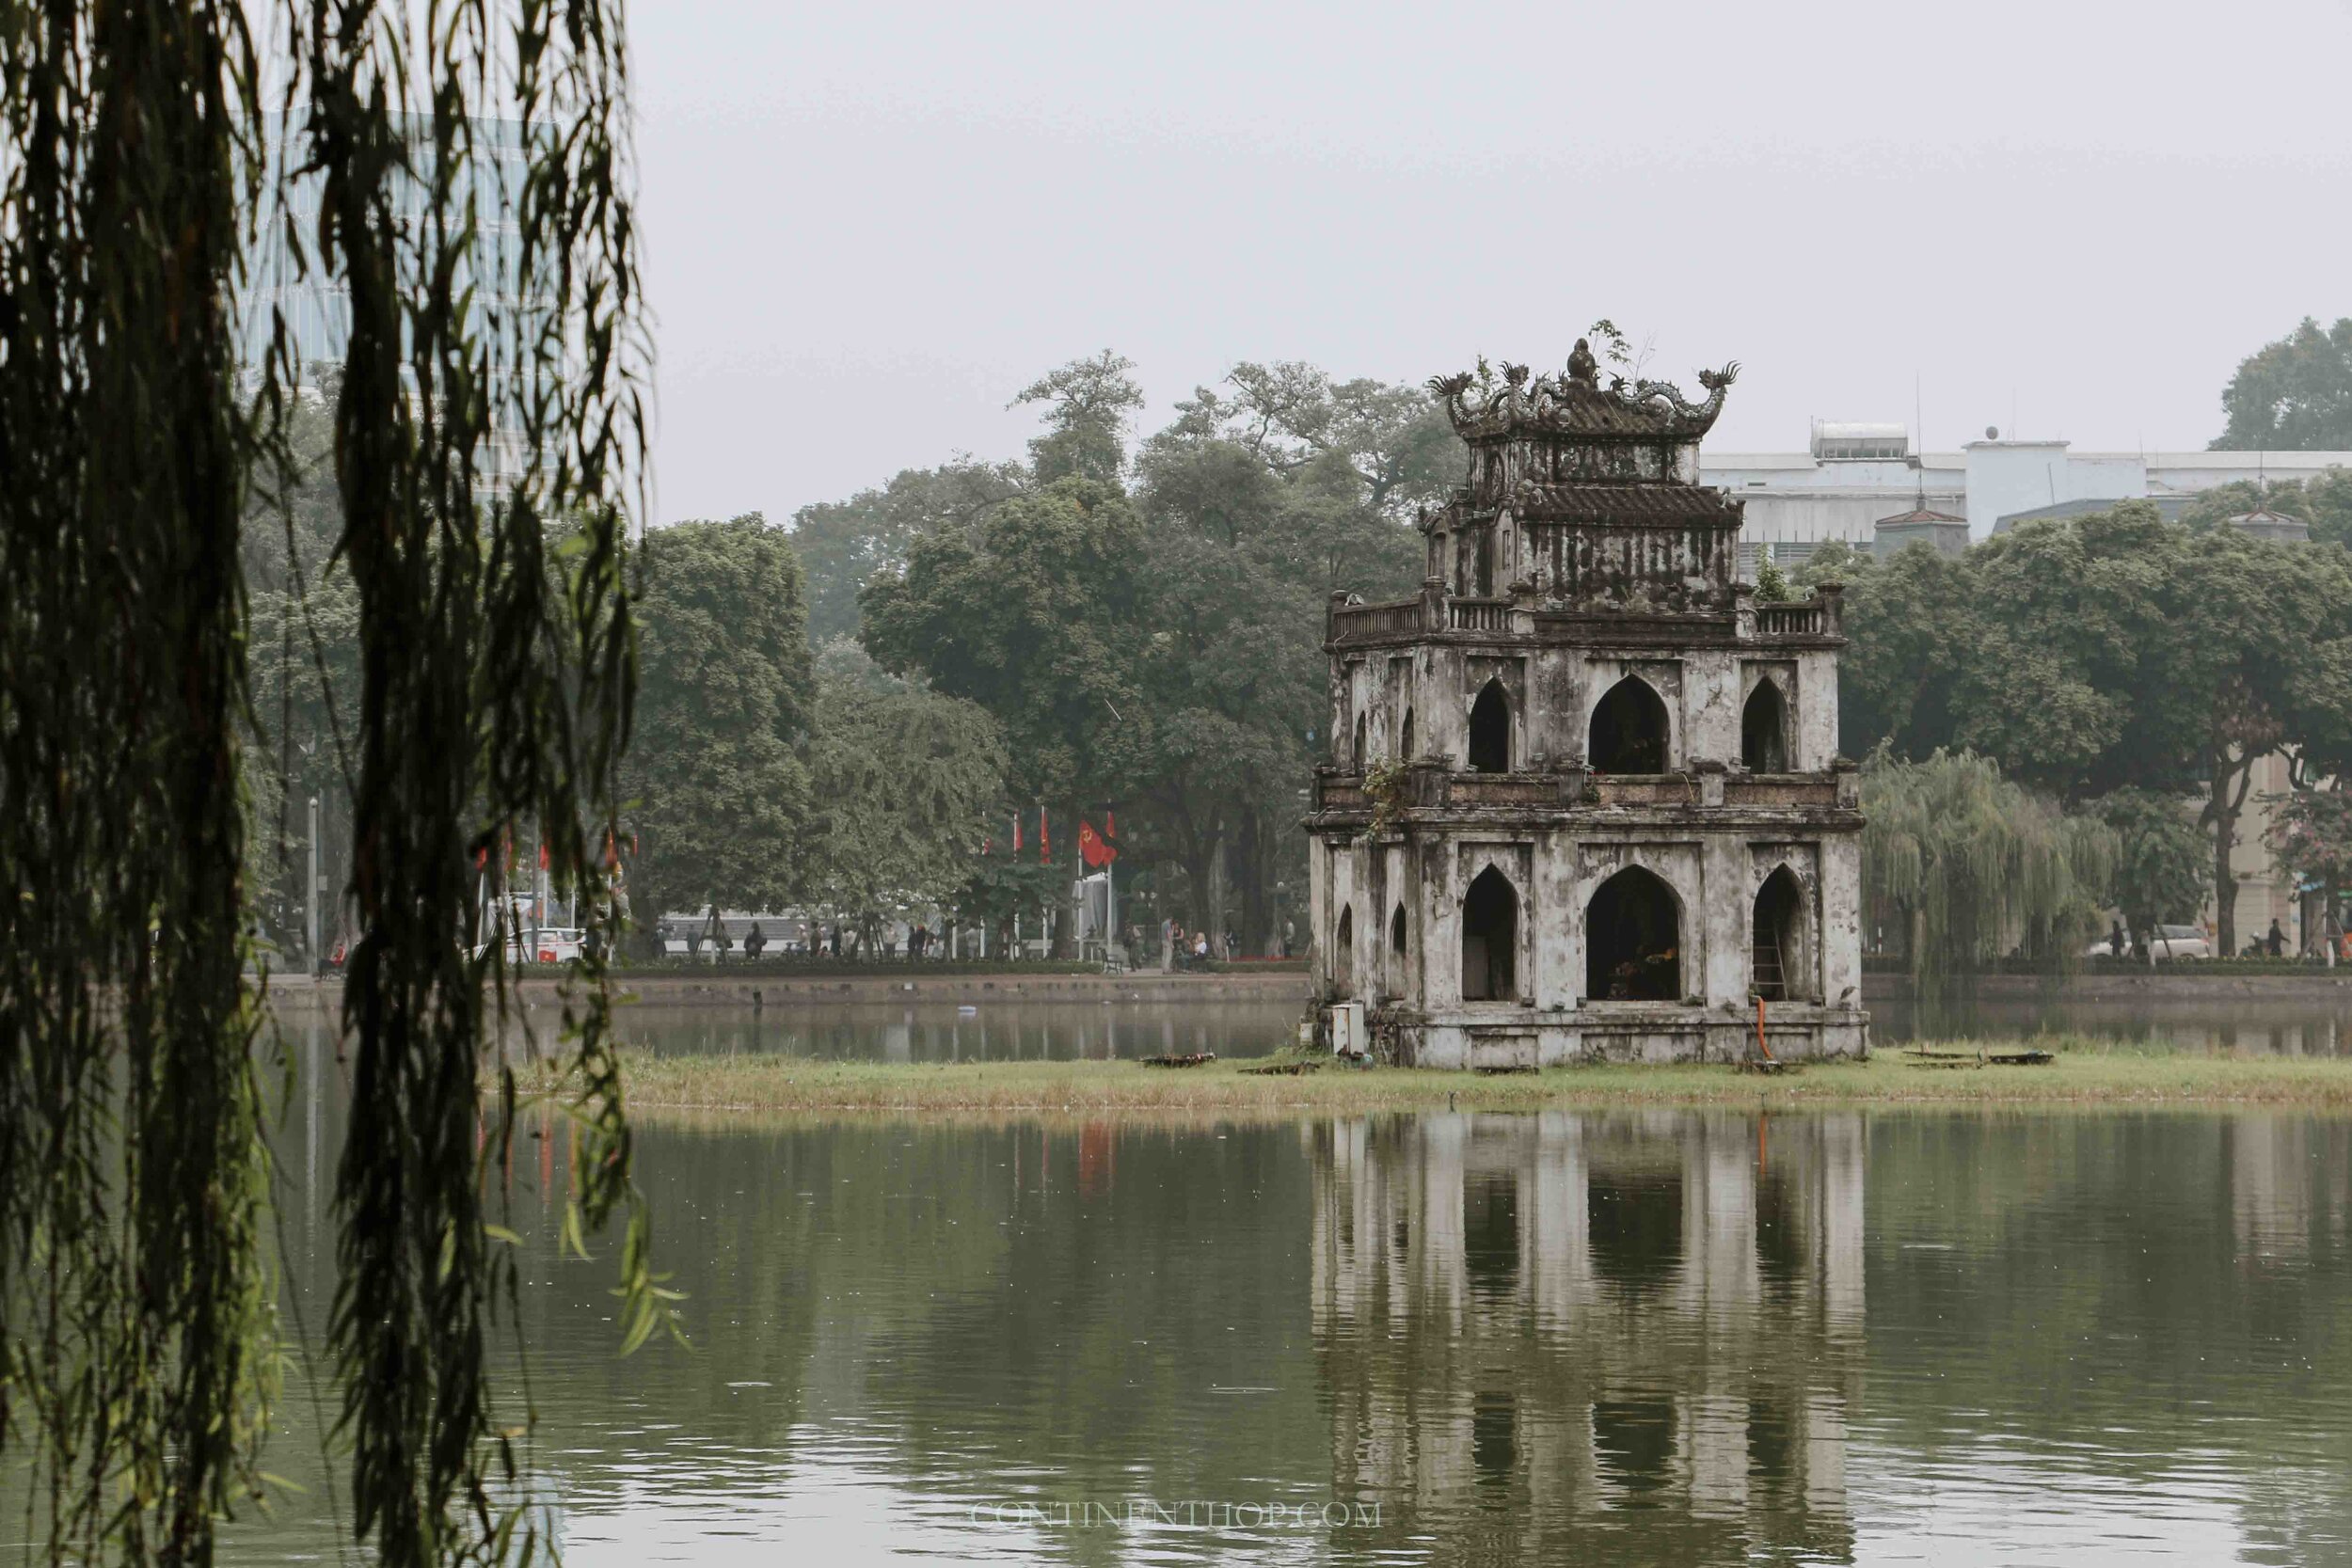 Image of the turtle temple in the middle of a lake in Hanoi Vietnam